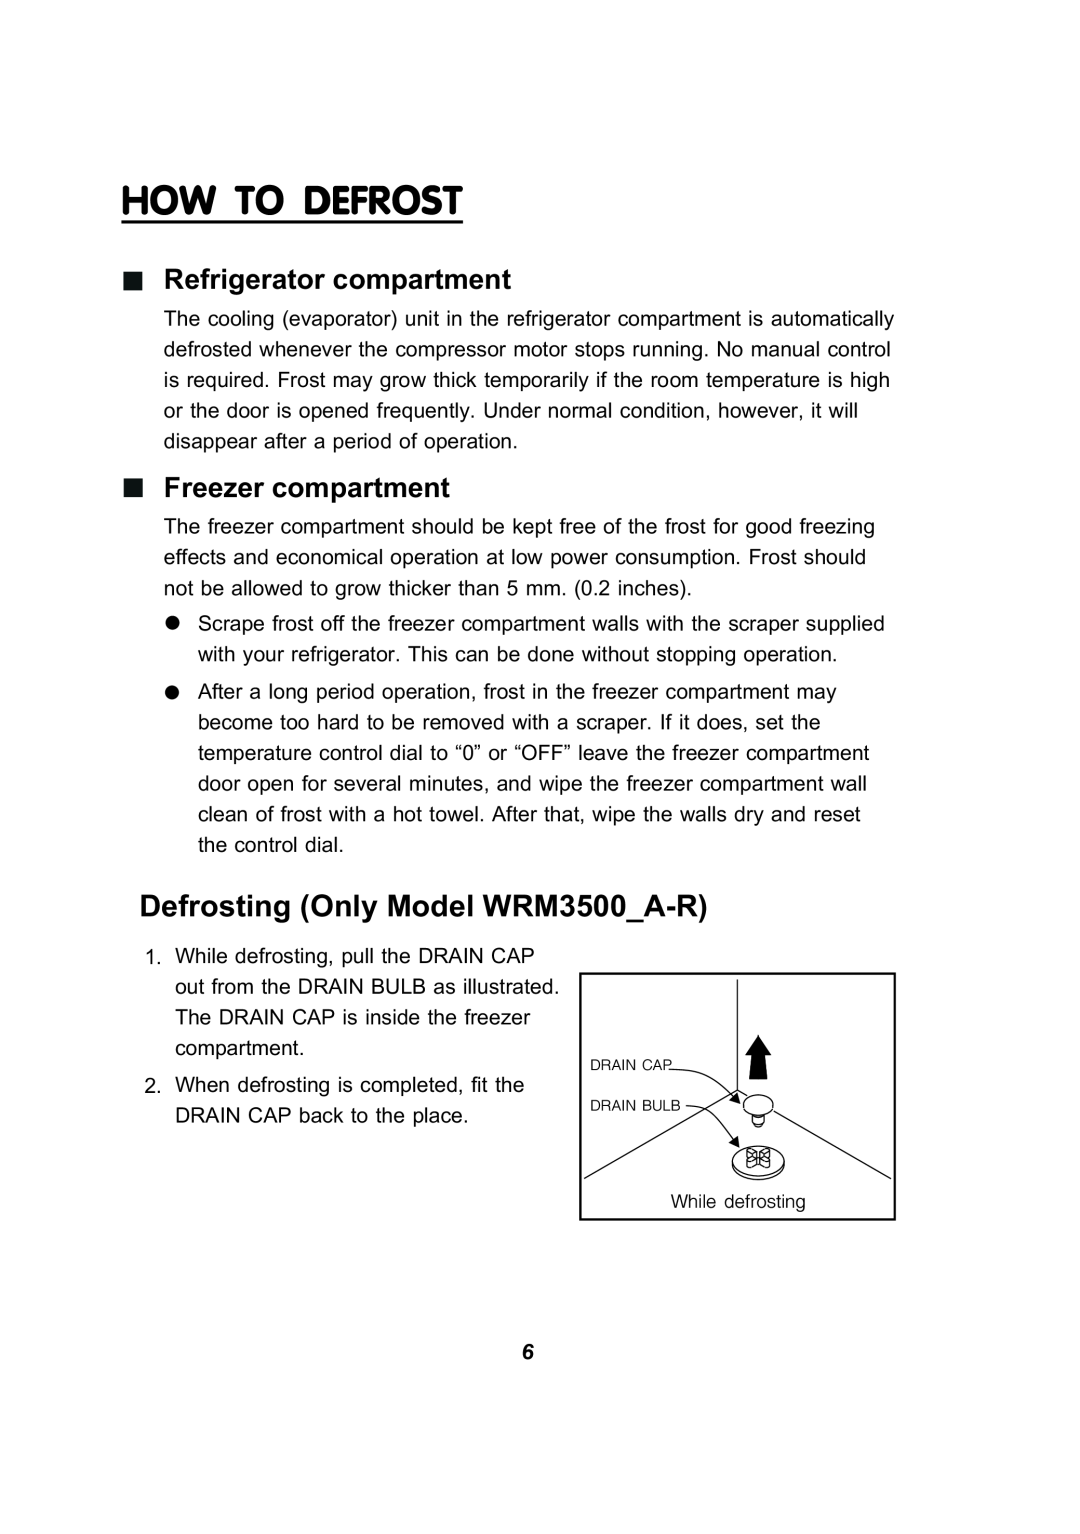 Electrolux WRM2000_A-R Howtodefrost, Defrosting Only Model WRM3500A-R, Refrigerator compartment, Freezer compartment 